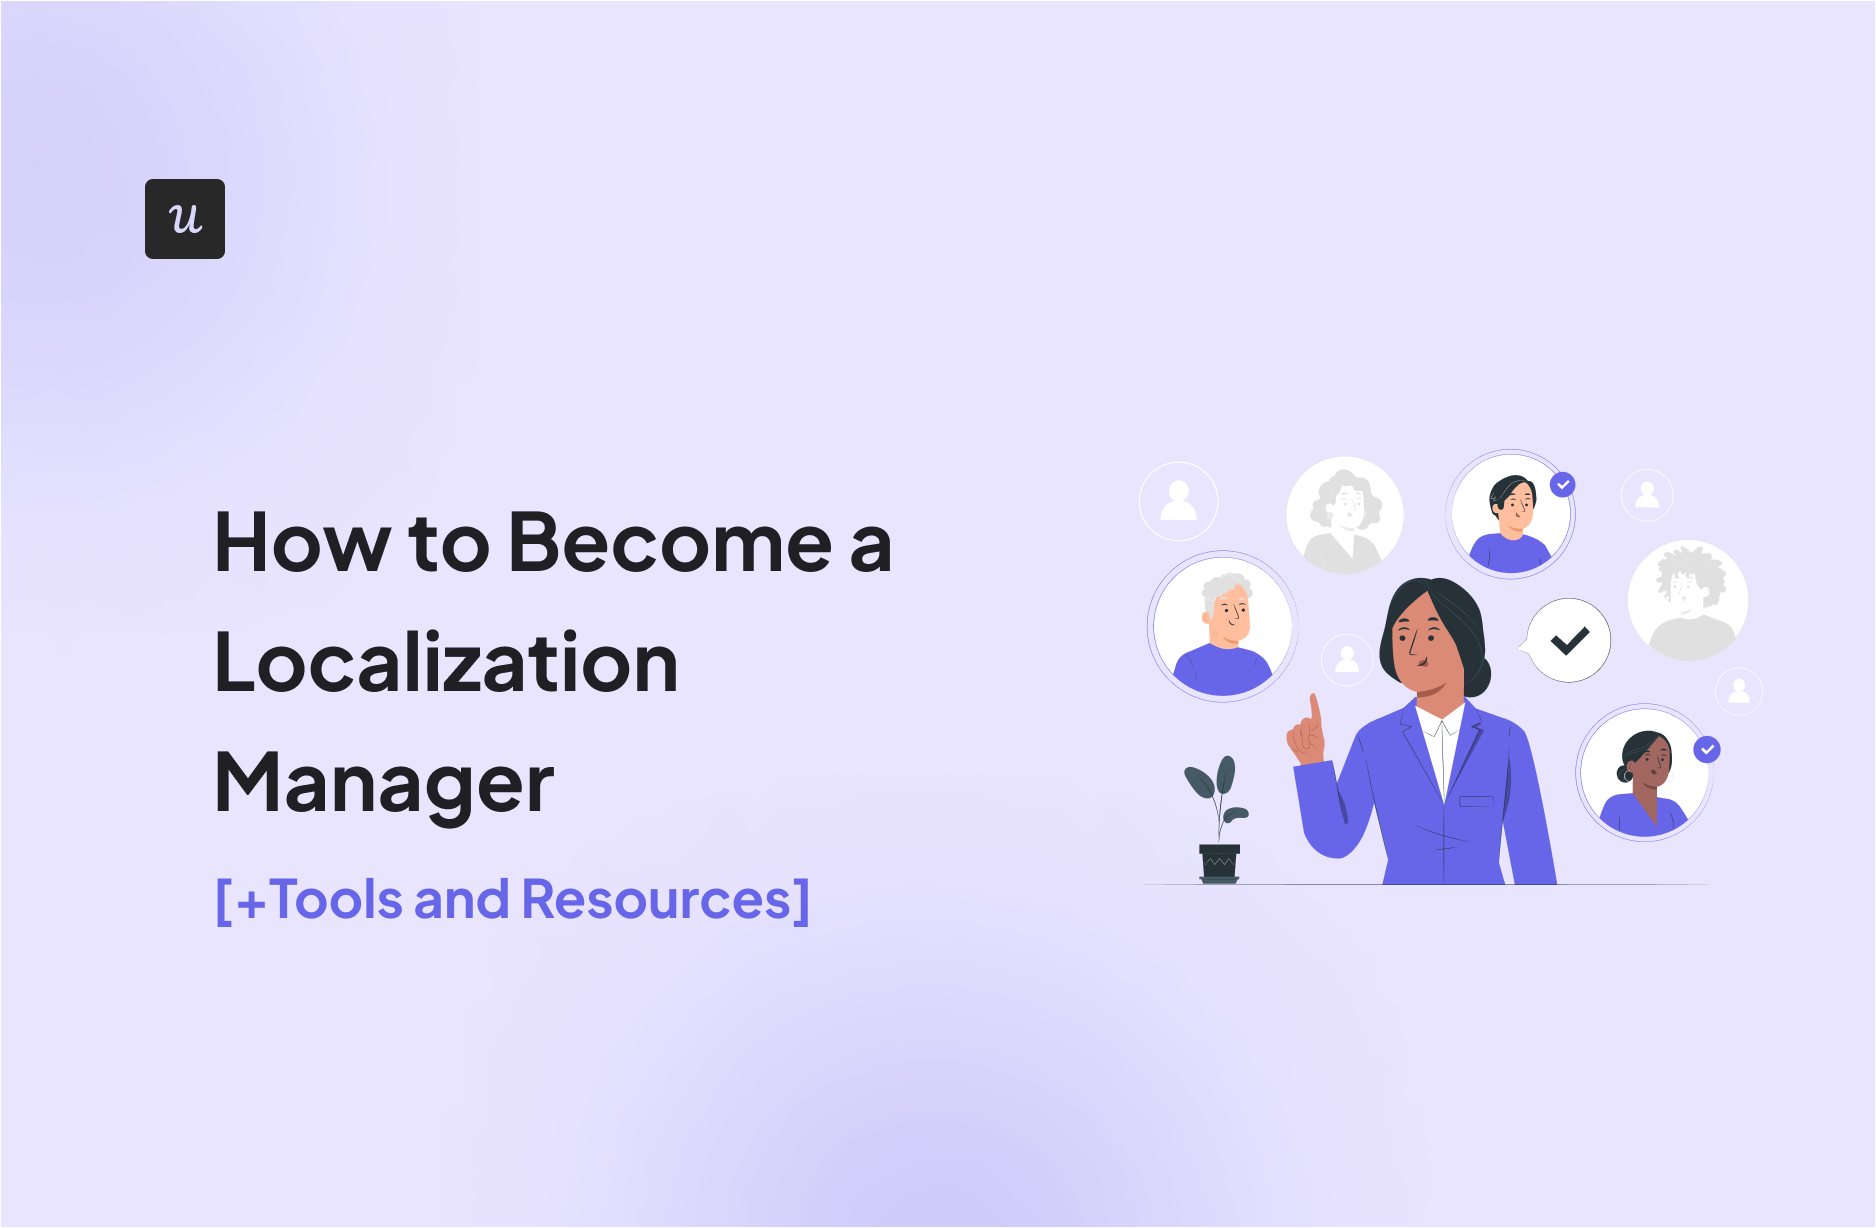 How to Become a Localization Manager